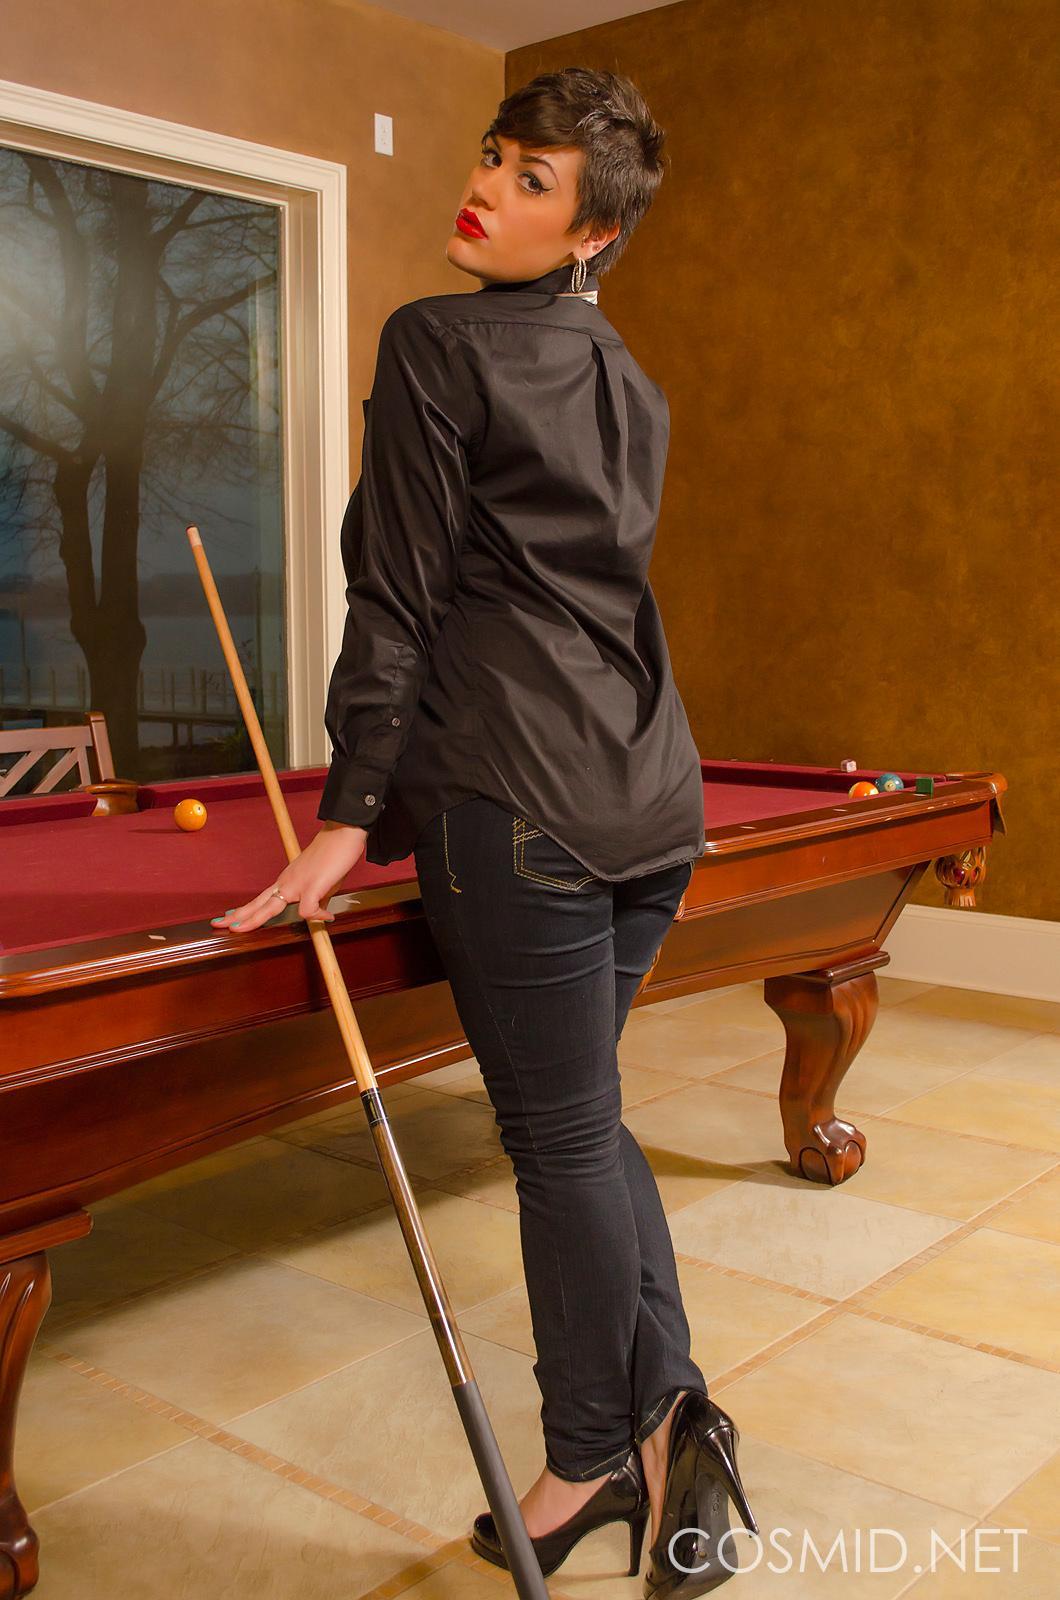 Busty short-haired girl Annalise gets turned on by a game of pool #53248322